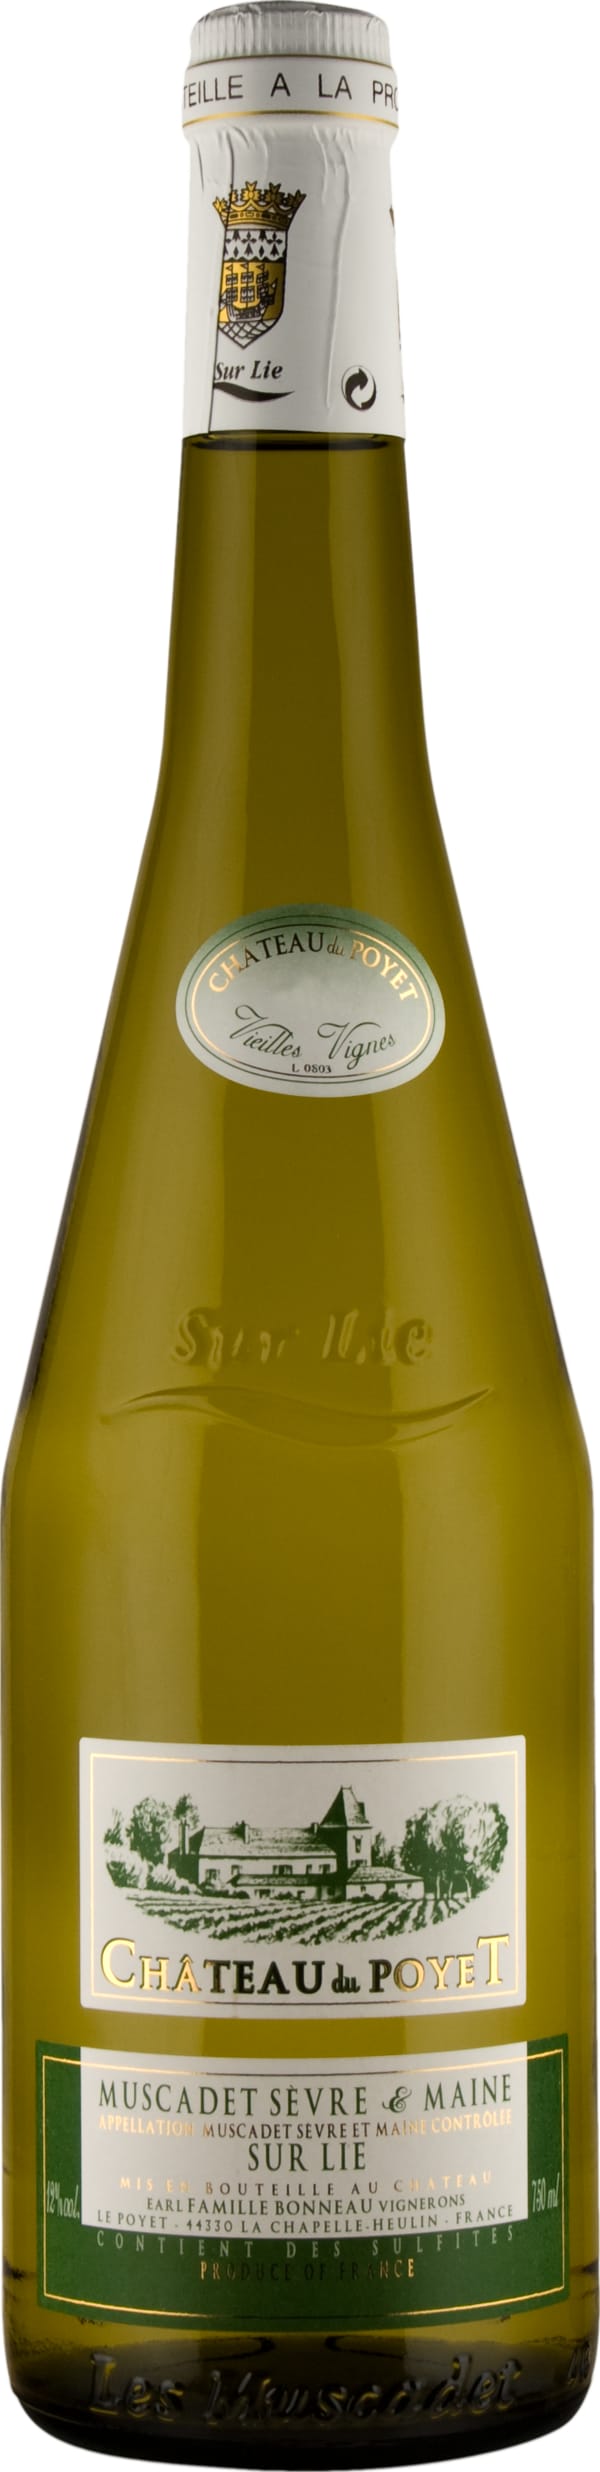 Muscadet Sevre et Maine 22 Poyet 75cl - Buy Chateau du Poyet Wines from GREAT WINES DIRECT wine shop